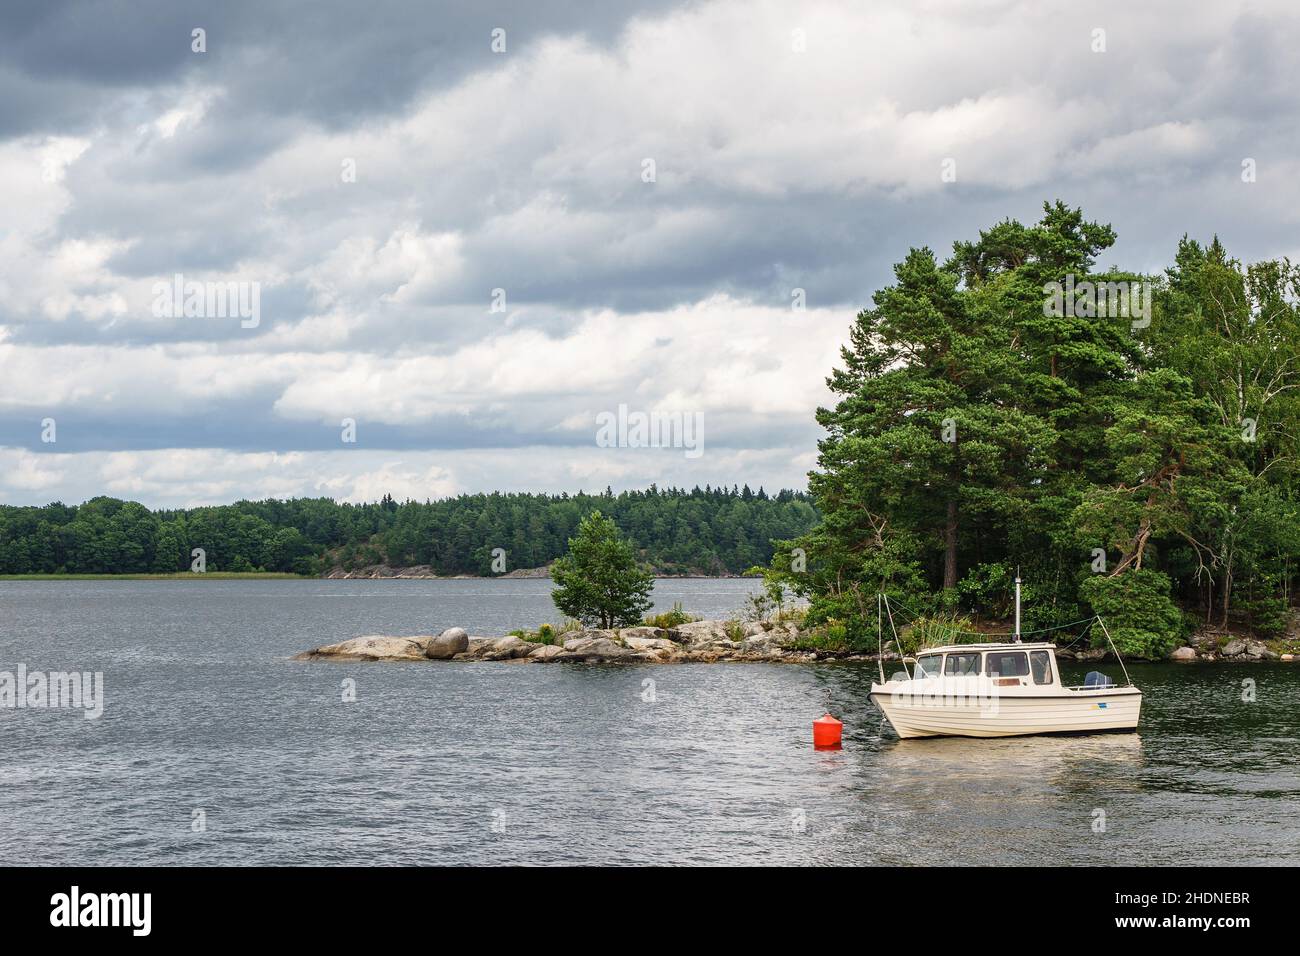 Lidingö High Resolution Stock Photography and Images - Alamy